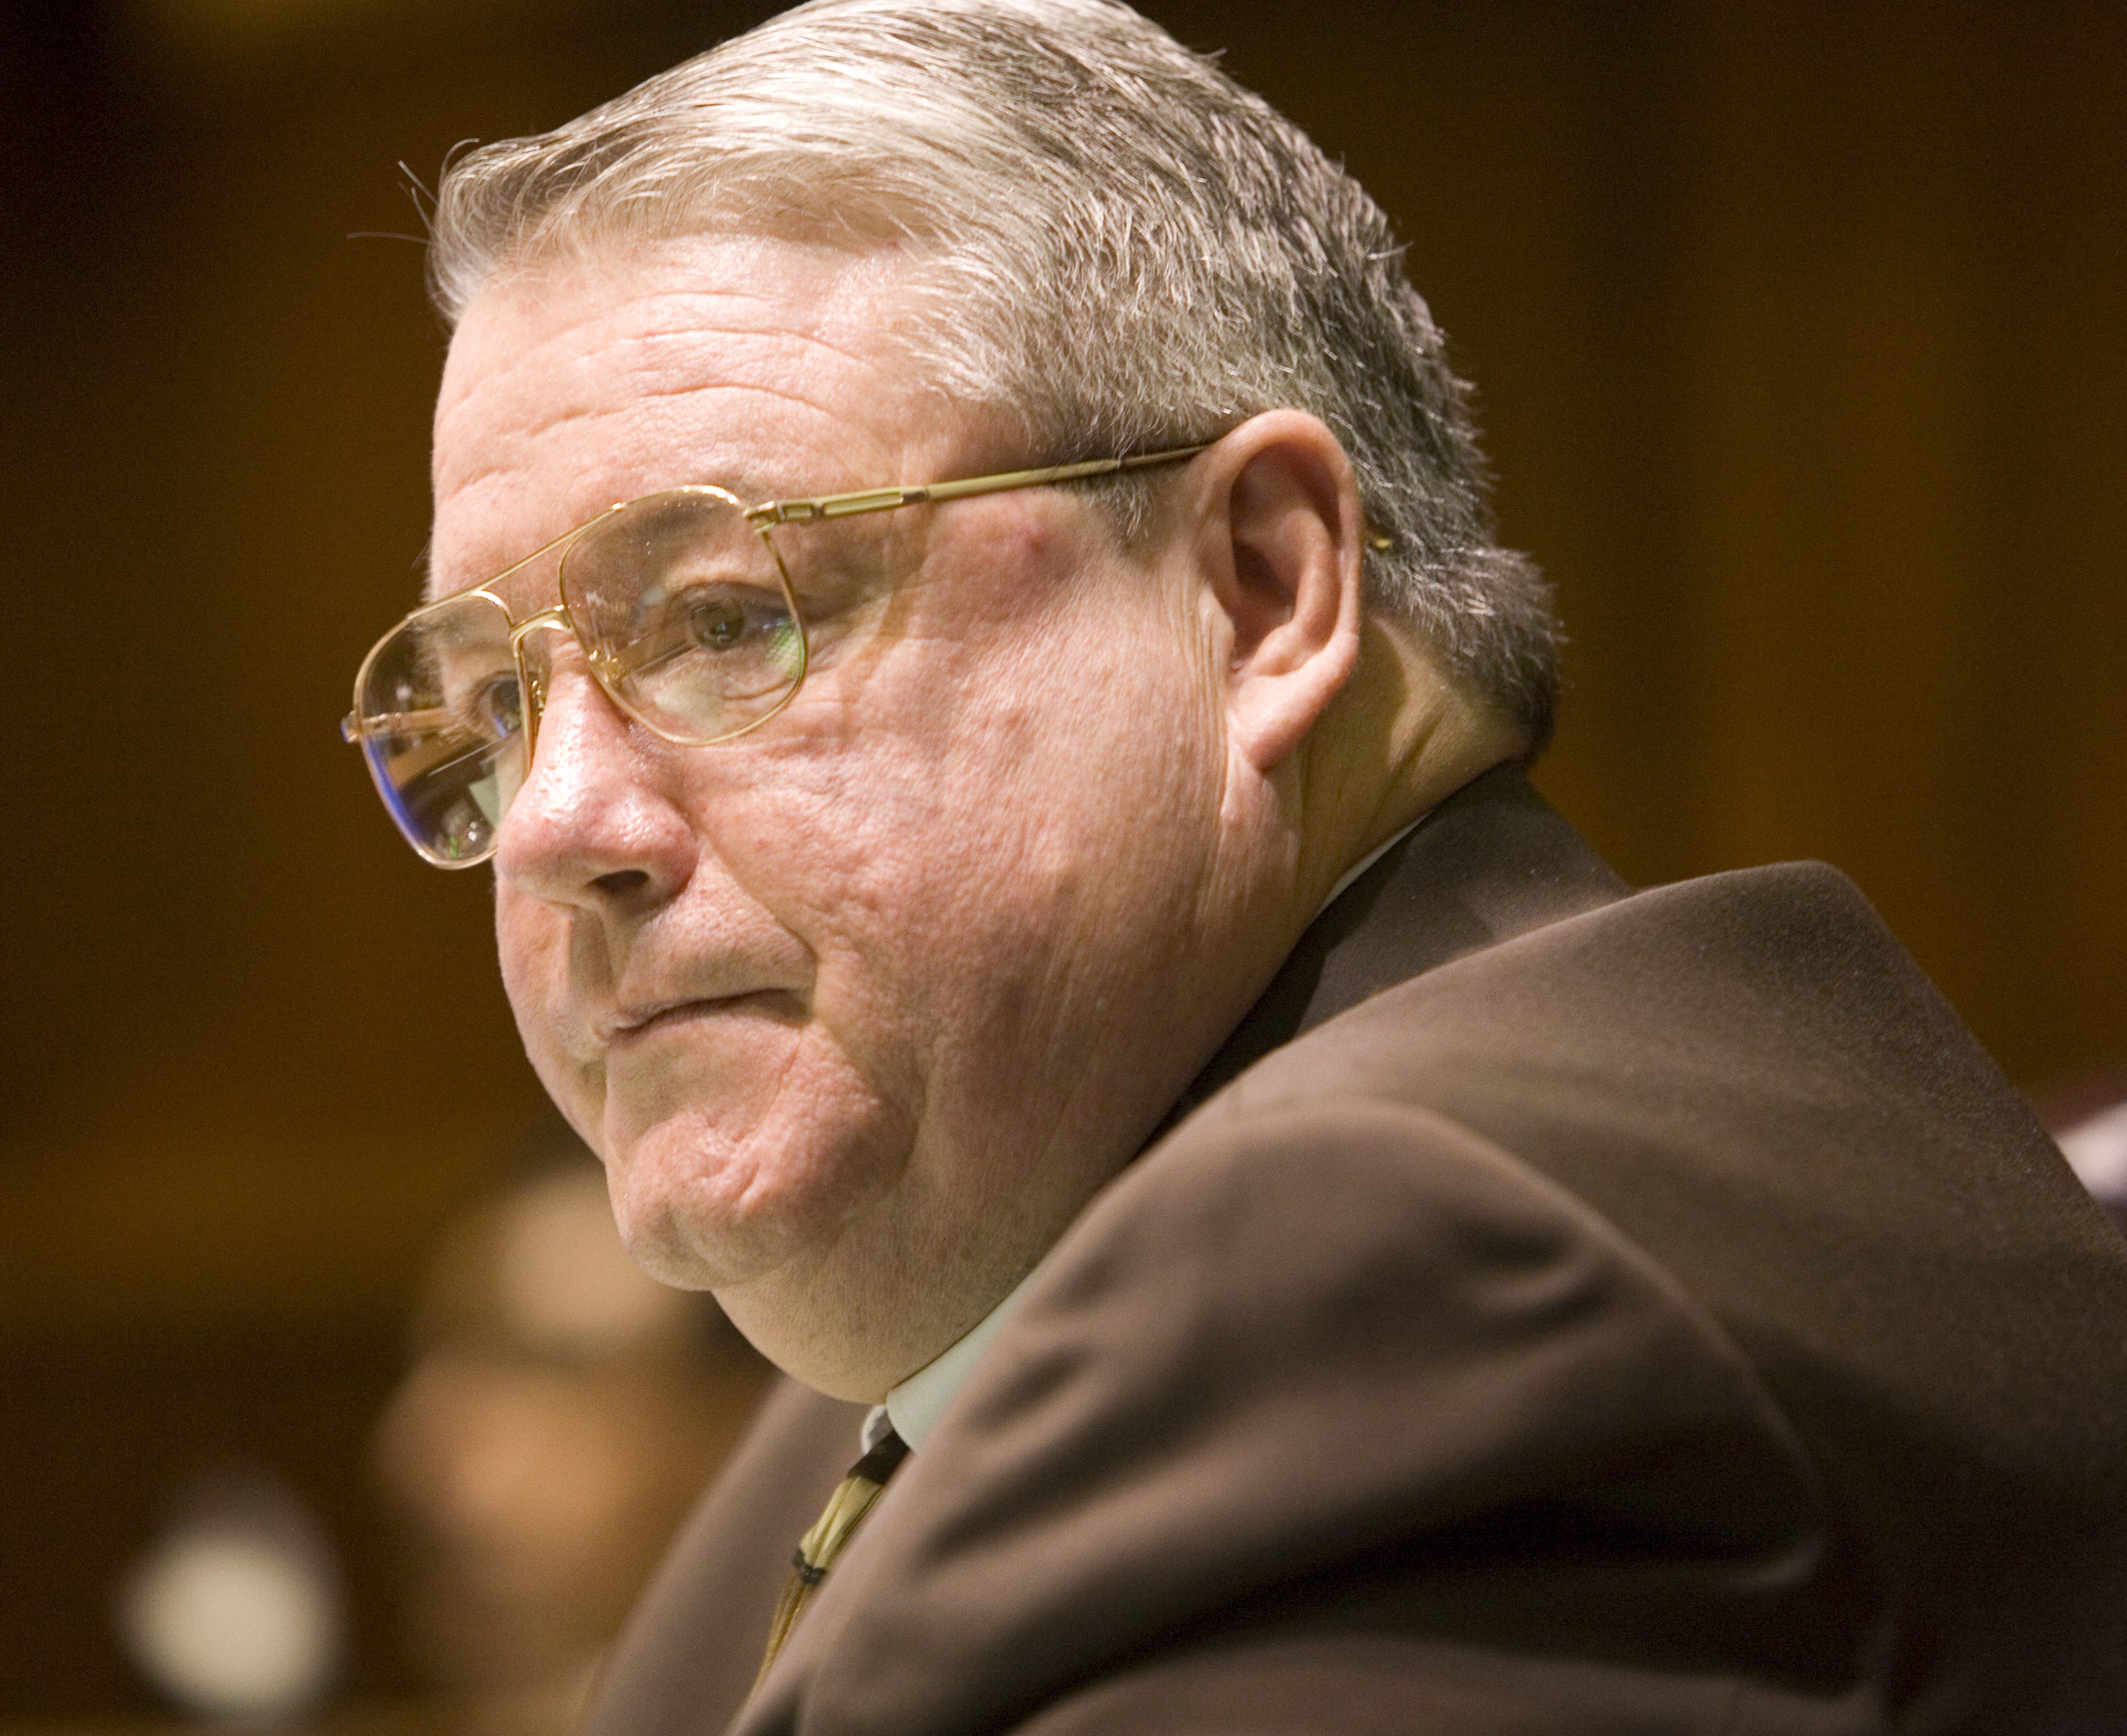 April 19, 2024: Jim Weiers, former Arizona Speaker of the House, spent time in both the state House and the Senate from 1994 to 2013. His speakership lasted seven years, from 1999-2001 and 2005-2009. Brother Jerry Weiers, the mayor of Glendale, also served in the Arizona House of Representatives for four terms. The two served together for eight years. Jim Weiers was 67 .